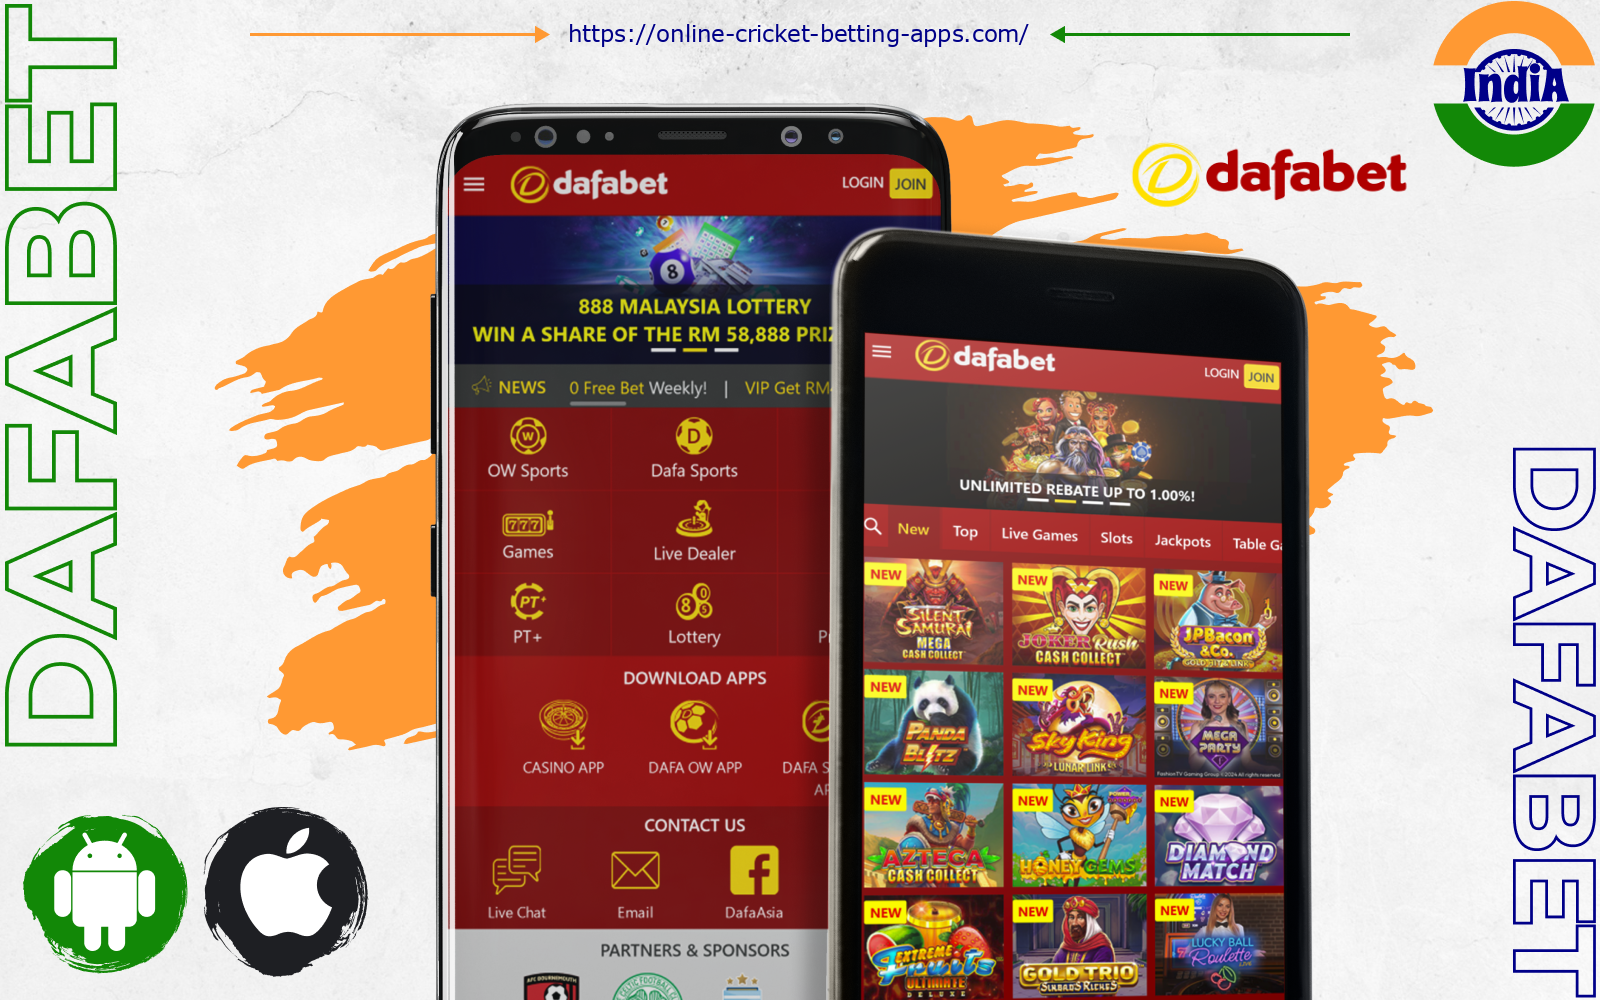 Dafabet is one of the most famous representatives of the top cricket betting apps, meeting all the trends of modern gambling